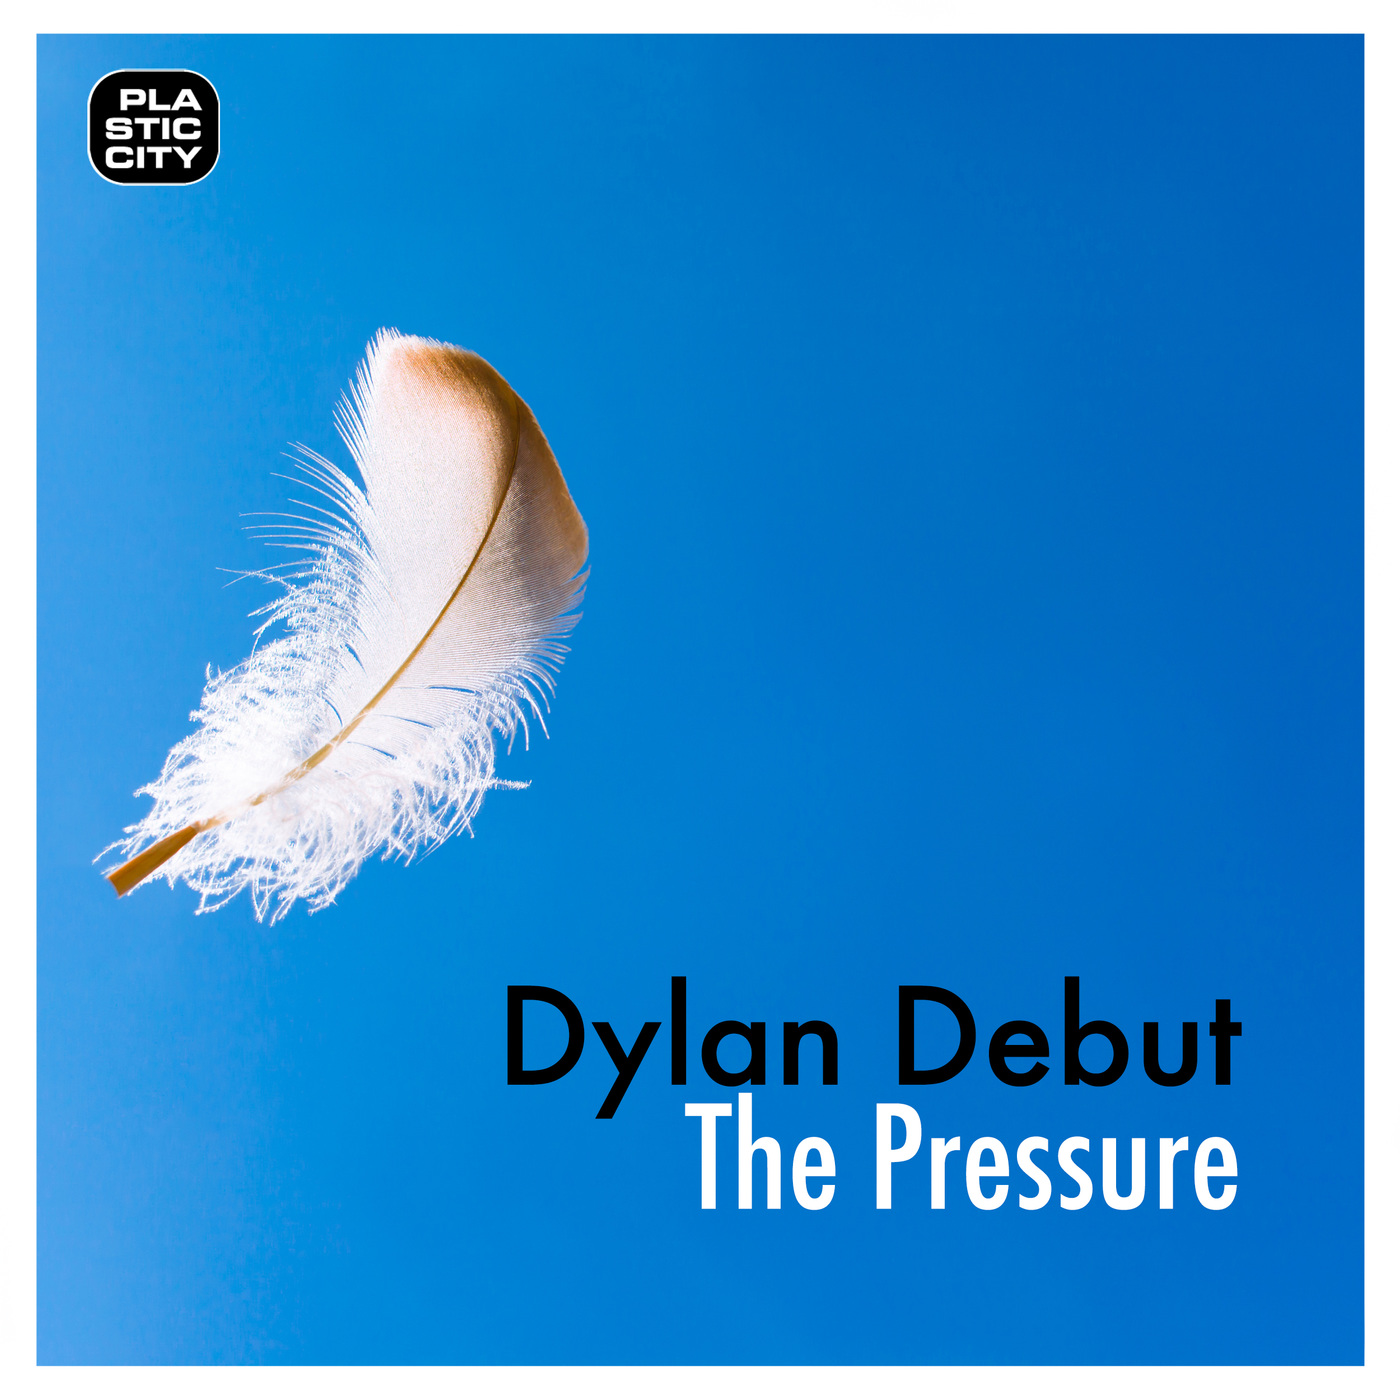 Dylan Debut - The Pressure / Plastic City. Play